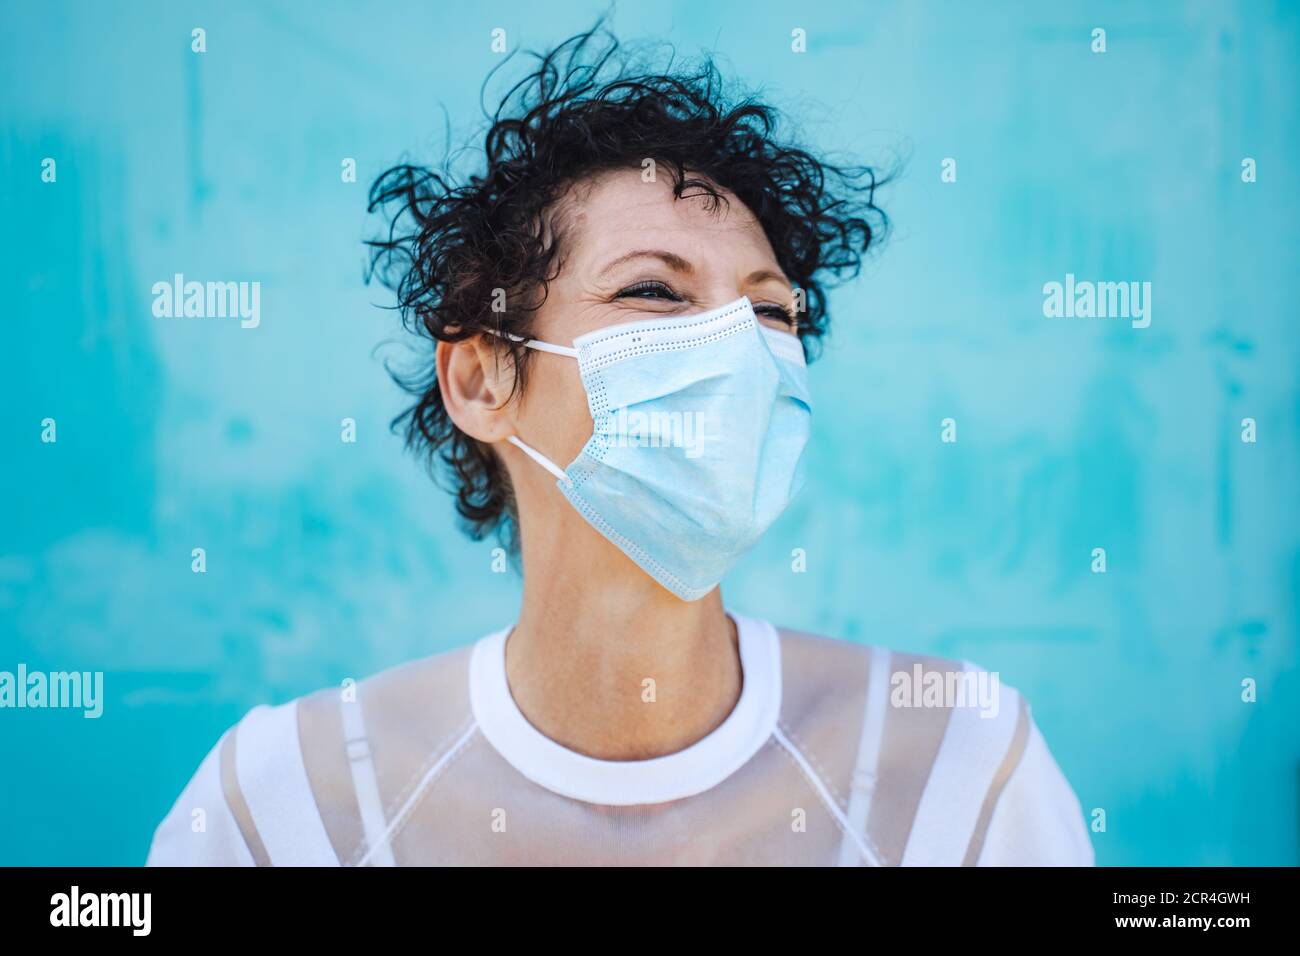 Close up of mature woman with curly short hair wearing safety mask against blue wall Stock Photo